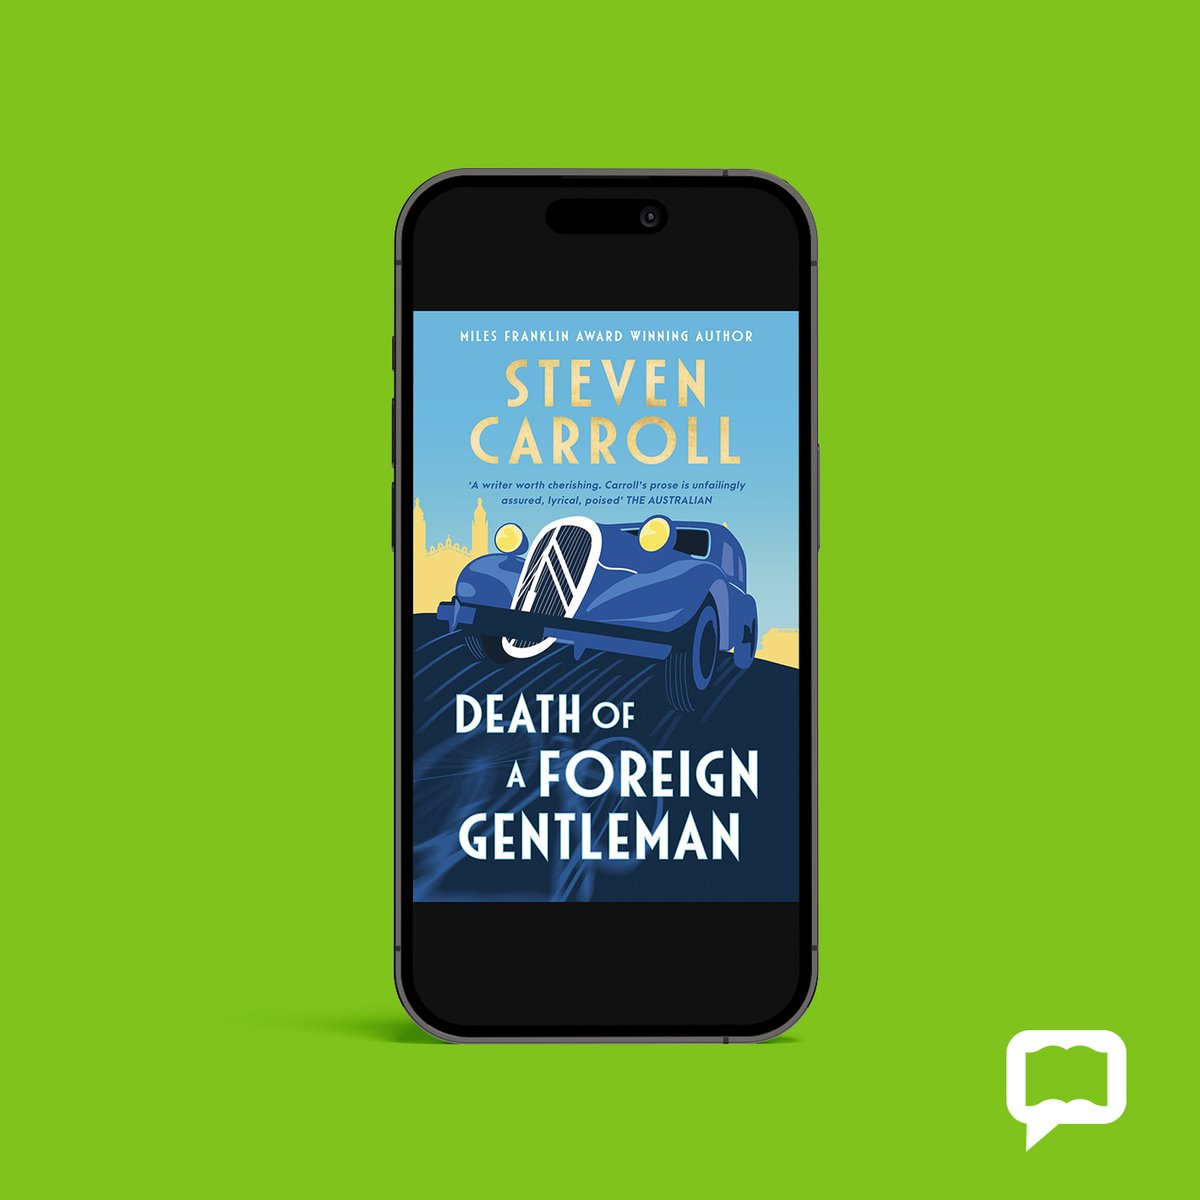 Dive into the world of Detective Sergeant Stephen Minter as he unravels the mysterious death of a German philosopher in this gripping literary crime novel by award-winning author Steven Carroll. Read on BorrowBox now! 

@HarperCollinsAU